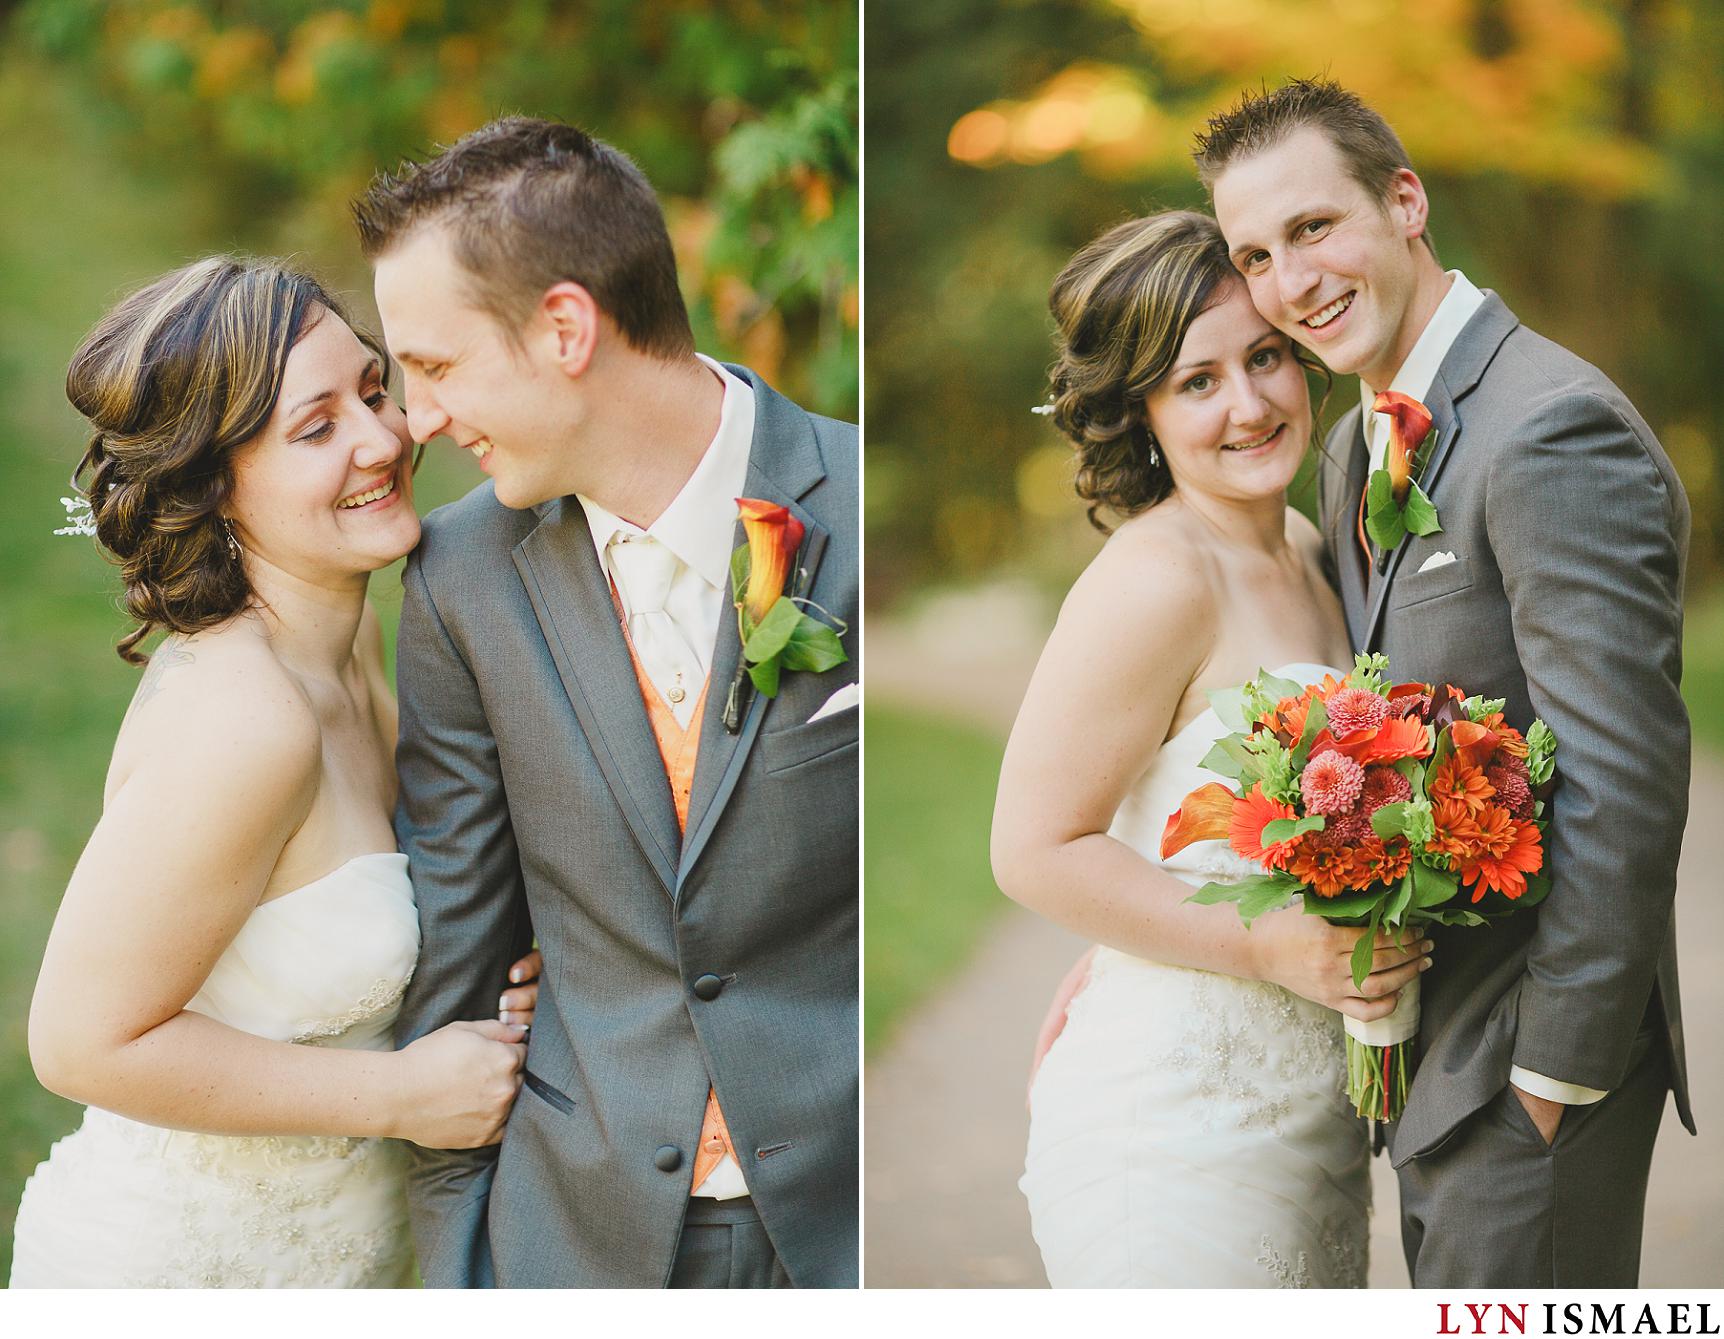 Portraits of the bride and groom who had their wedding in Elora, Ontario.